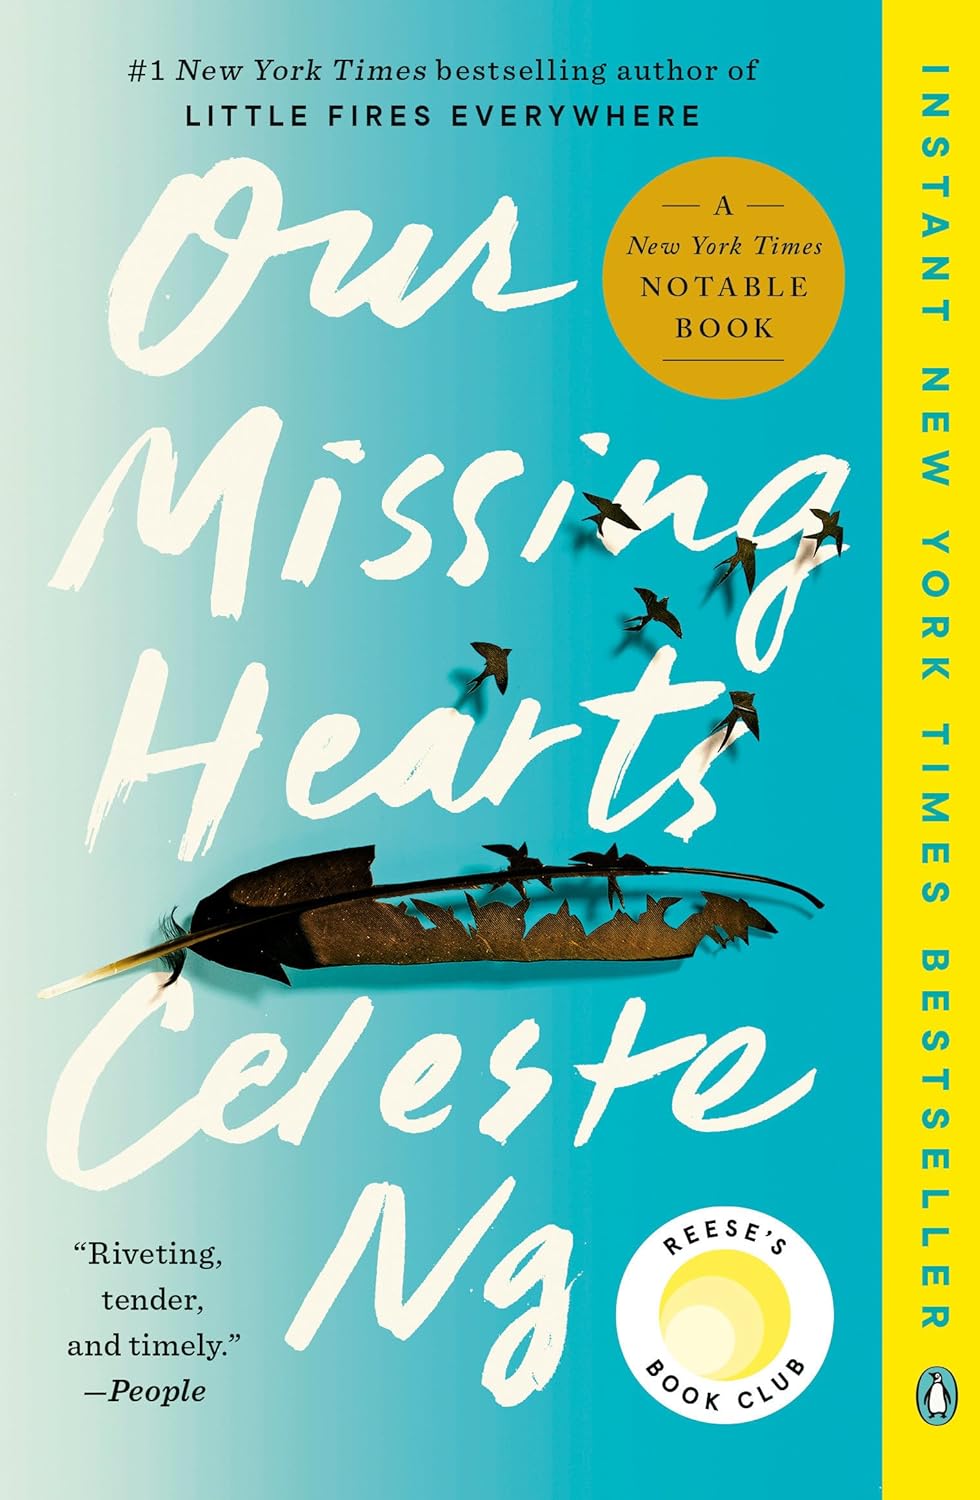 Our Missing Hearts: Reese's Book Club (a Novel) - by Celeste Ng